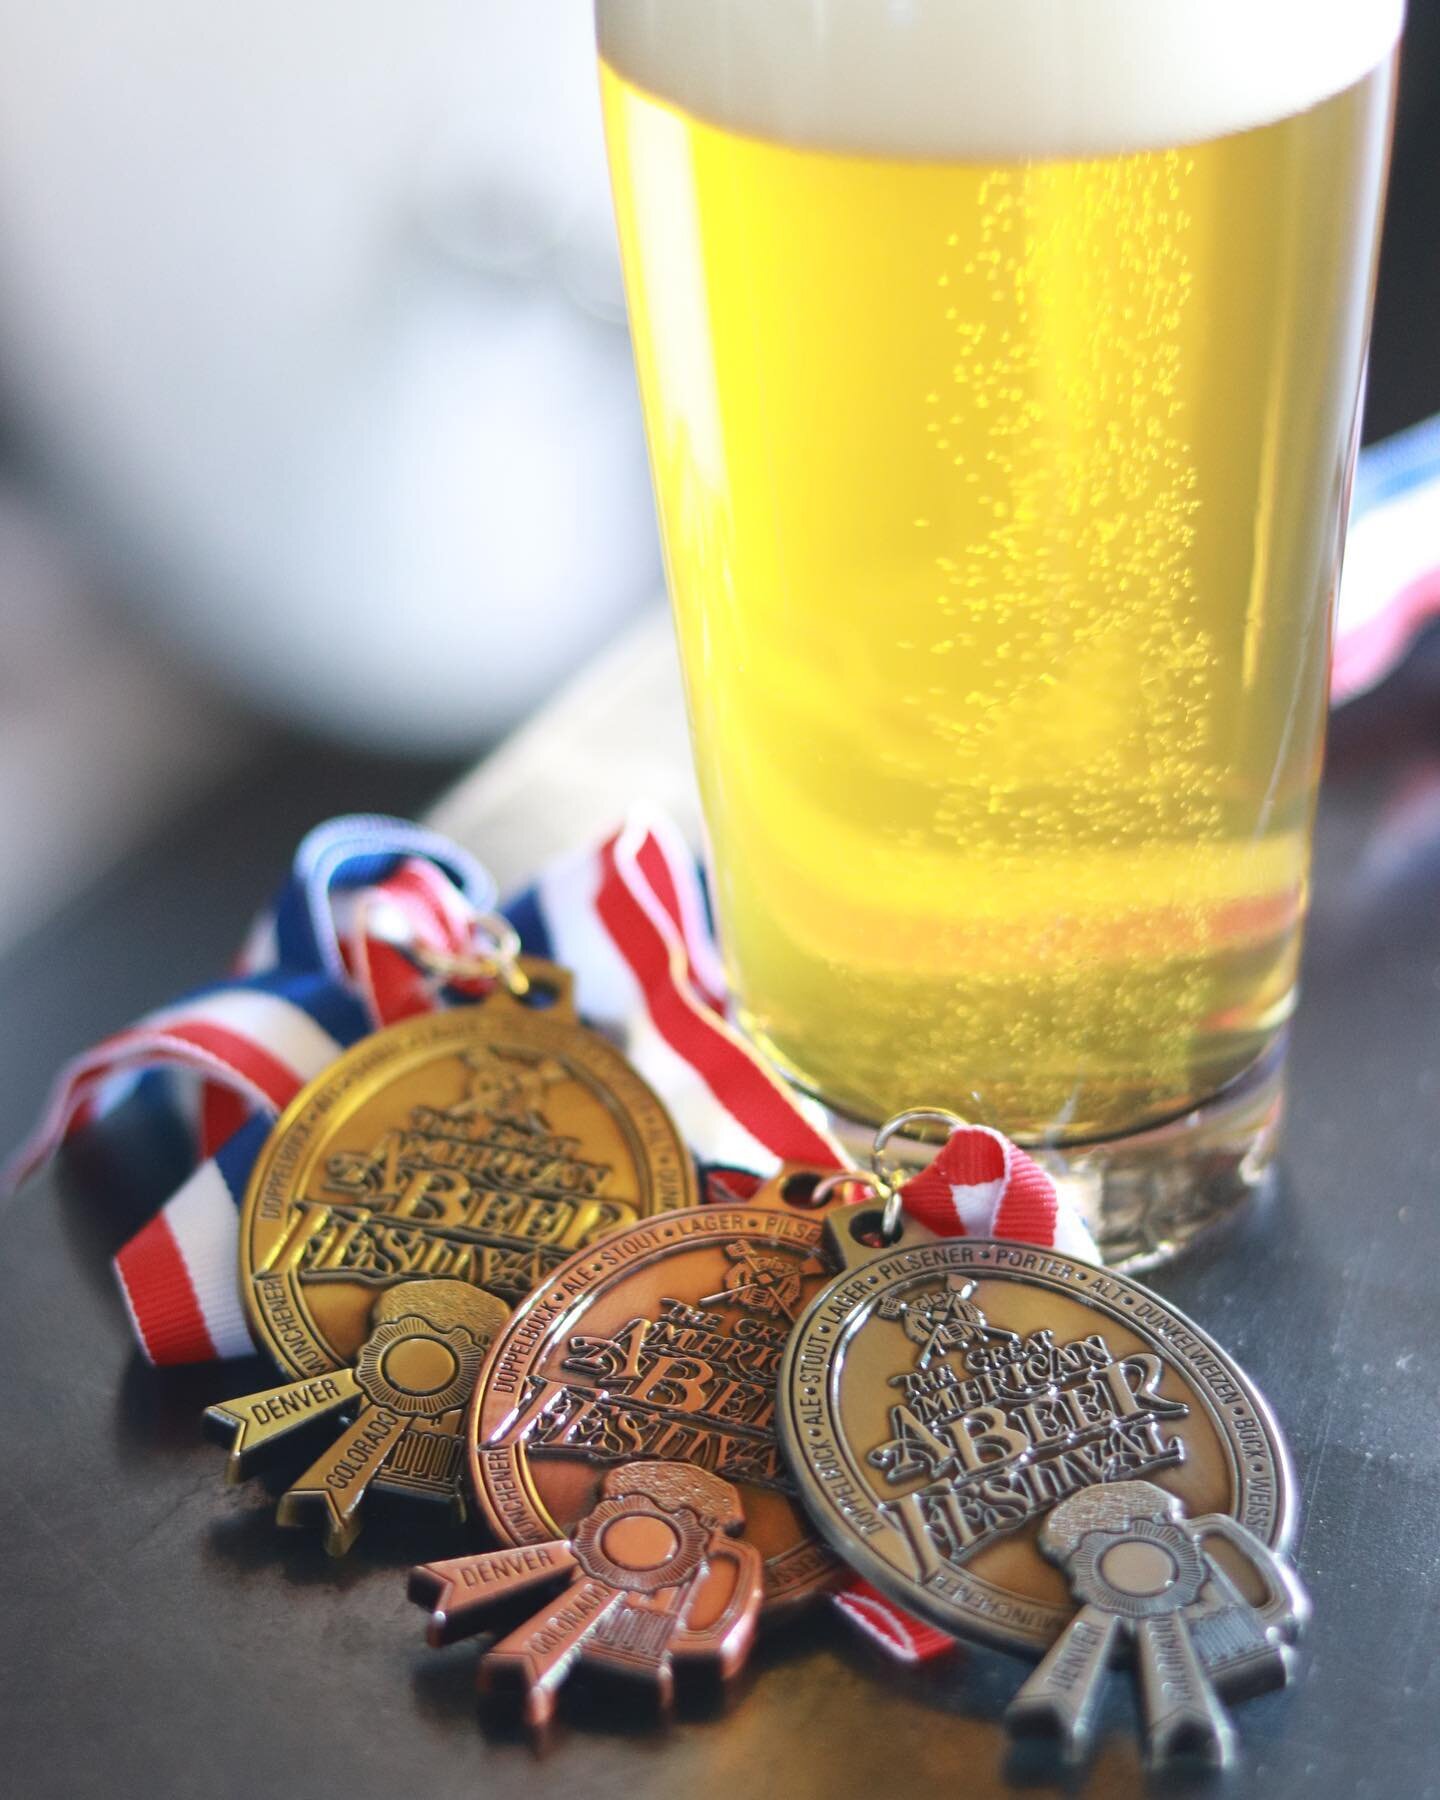 Orange County Breweries take home 11 medals at Great American Beer Festival&reg; 2023!

🥇 Huckleberry PHin Sour by @lostwindsbrewing won Gold for Fruited American Sour Ale 

🥈 Super Tonic by @docentbrewing won Silver for Coffee Stout or Porter

🥈C